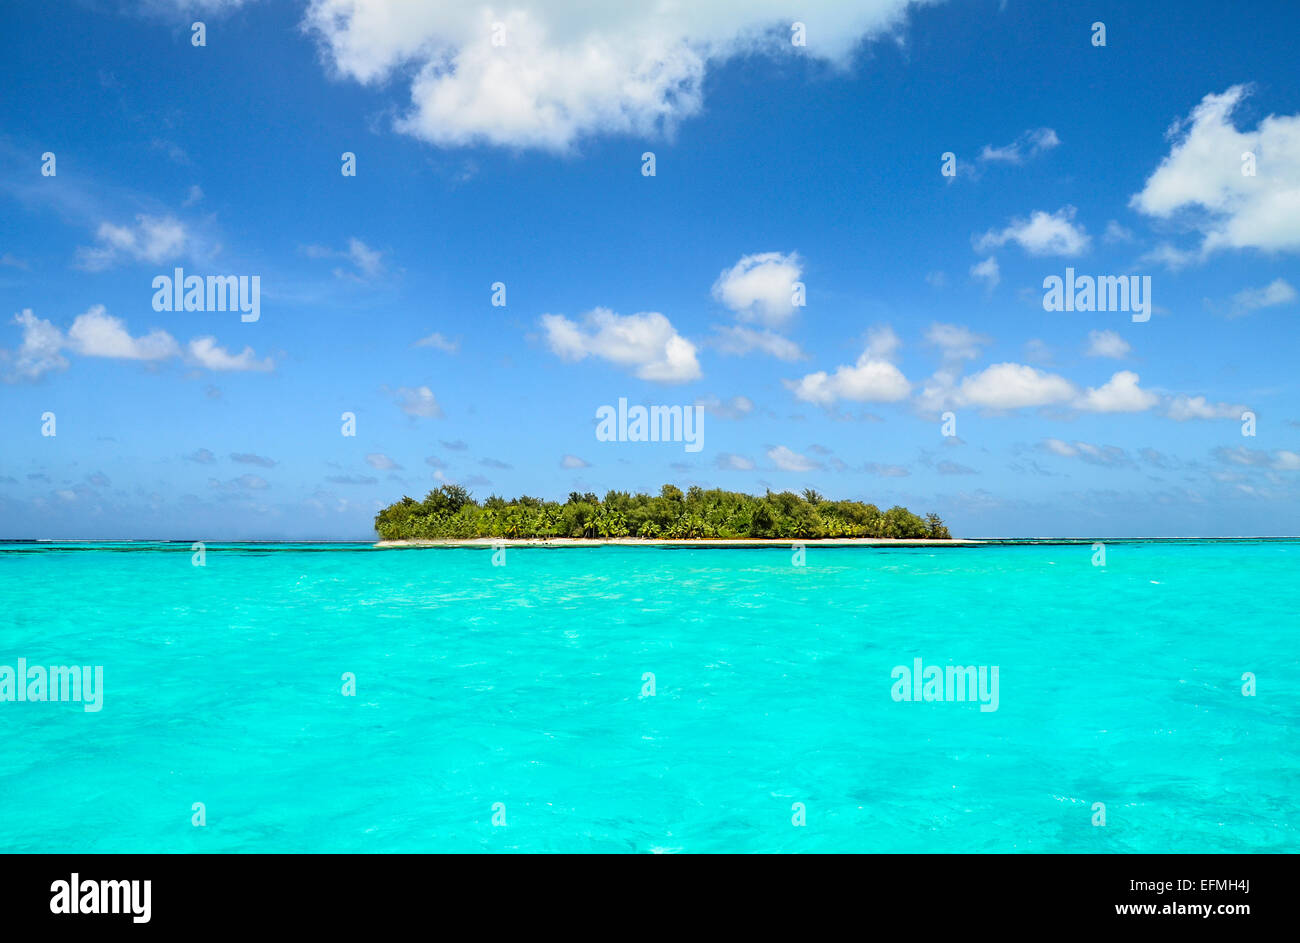 Tropical Paradise Island in the tropical western Pacific Ocean Stock Photo